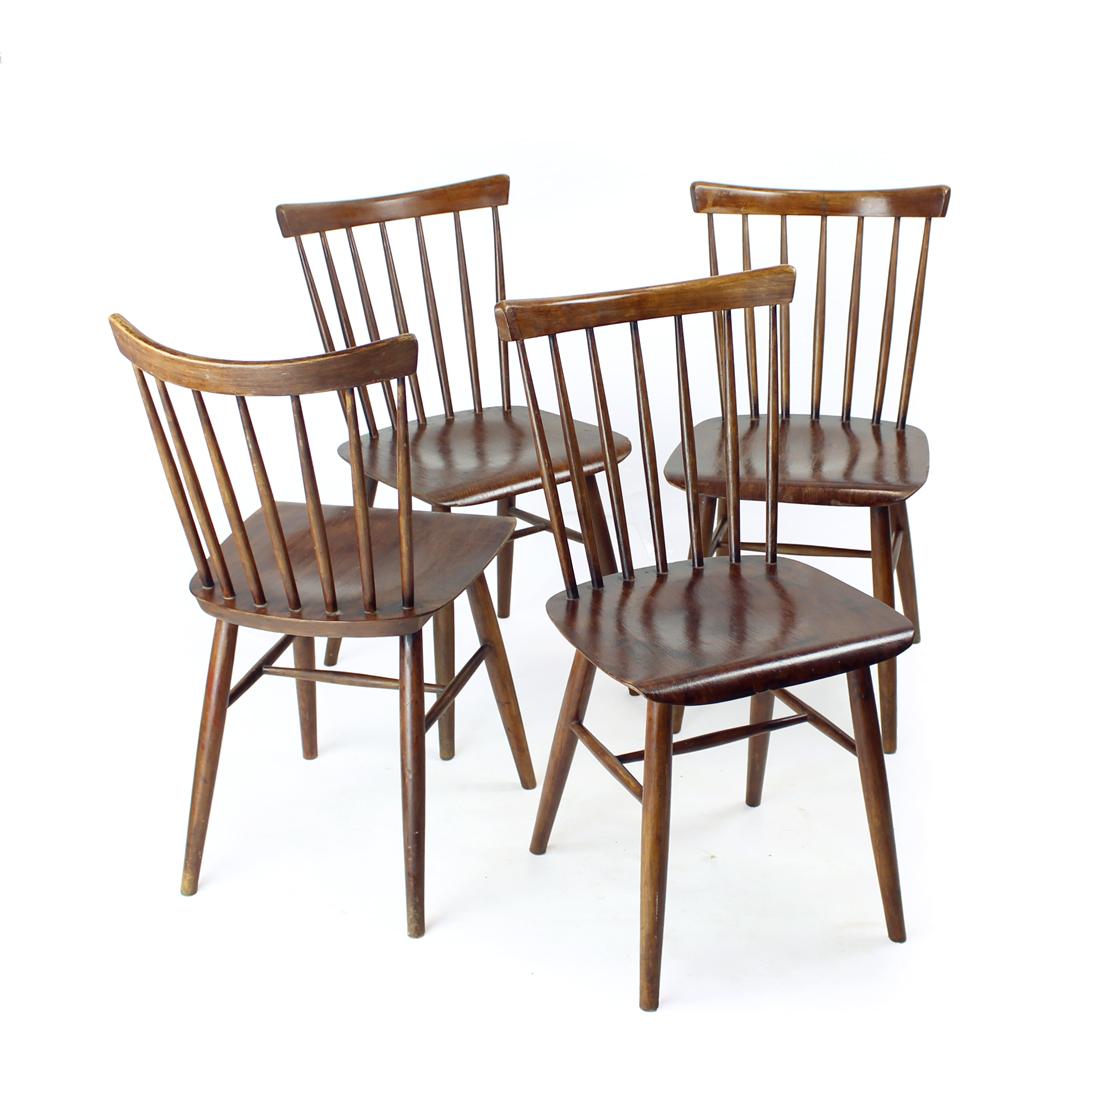 Set of the iconic Ironica chairs produced by TON. The timeless design of these chairs makes them a great fit for any interiors. The chairs are made of oak wood with a bent plywood seats. The chairs in this set are in very good vintage condition